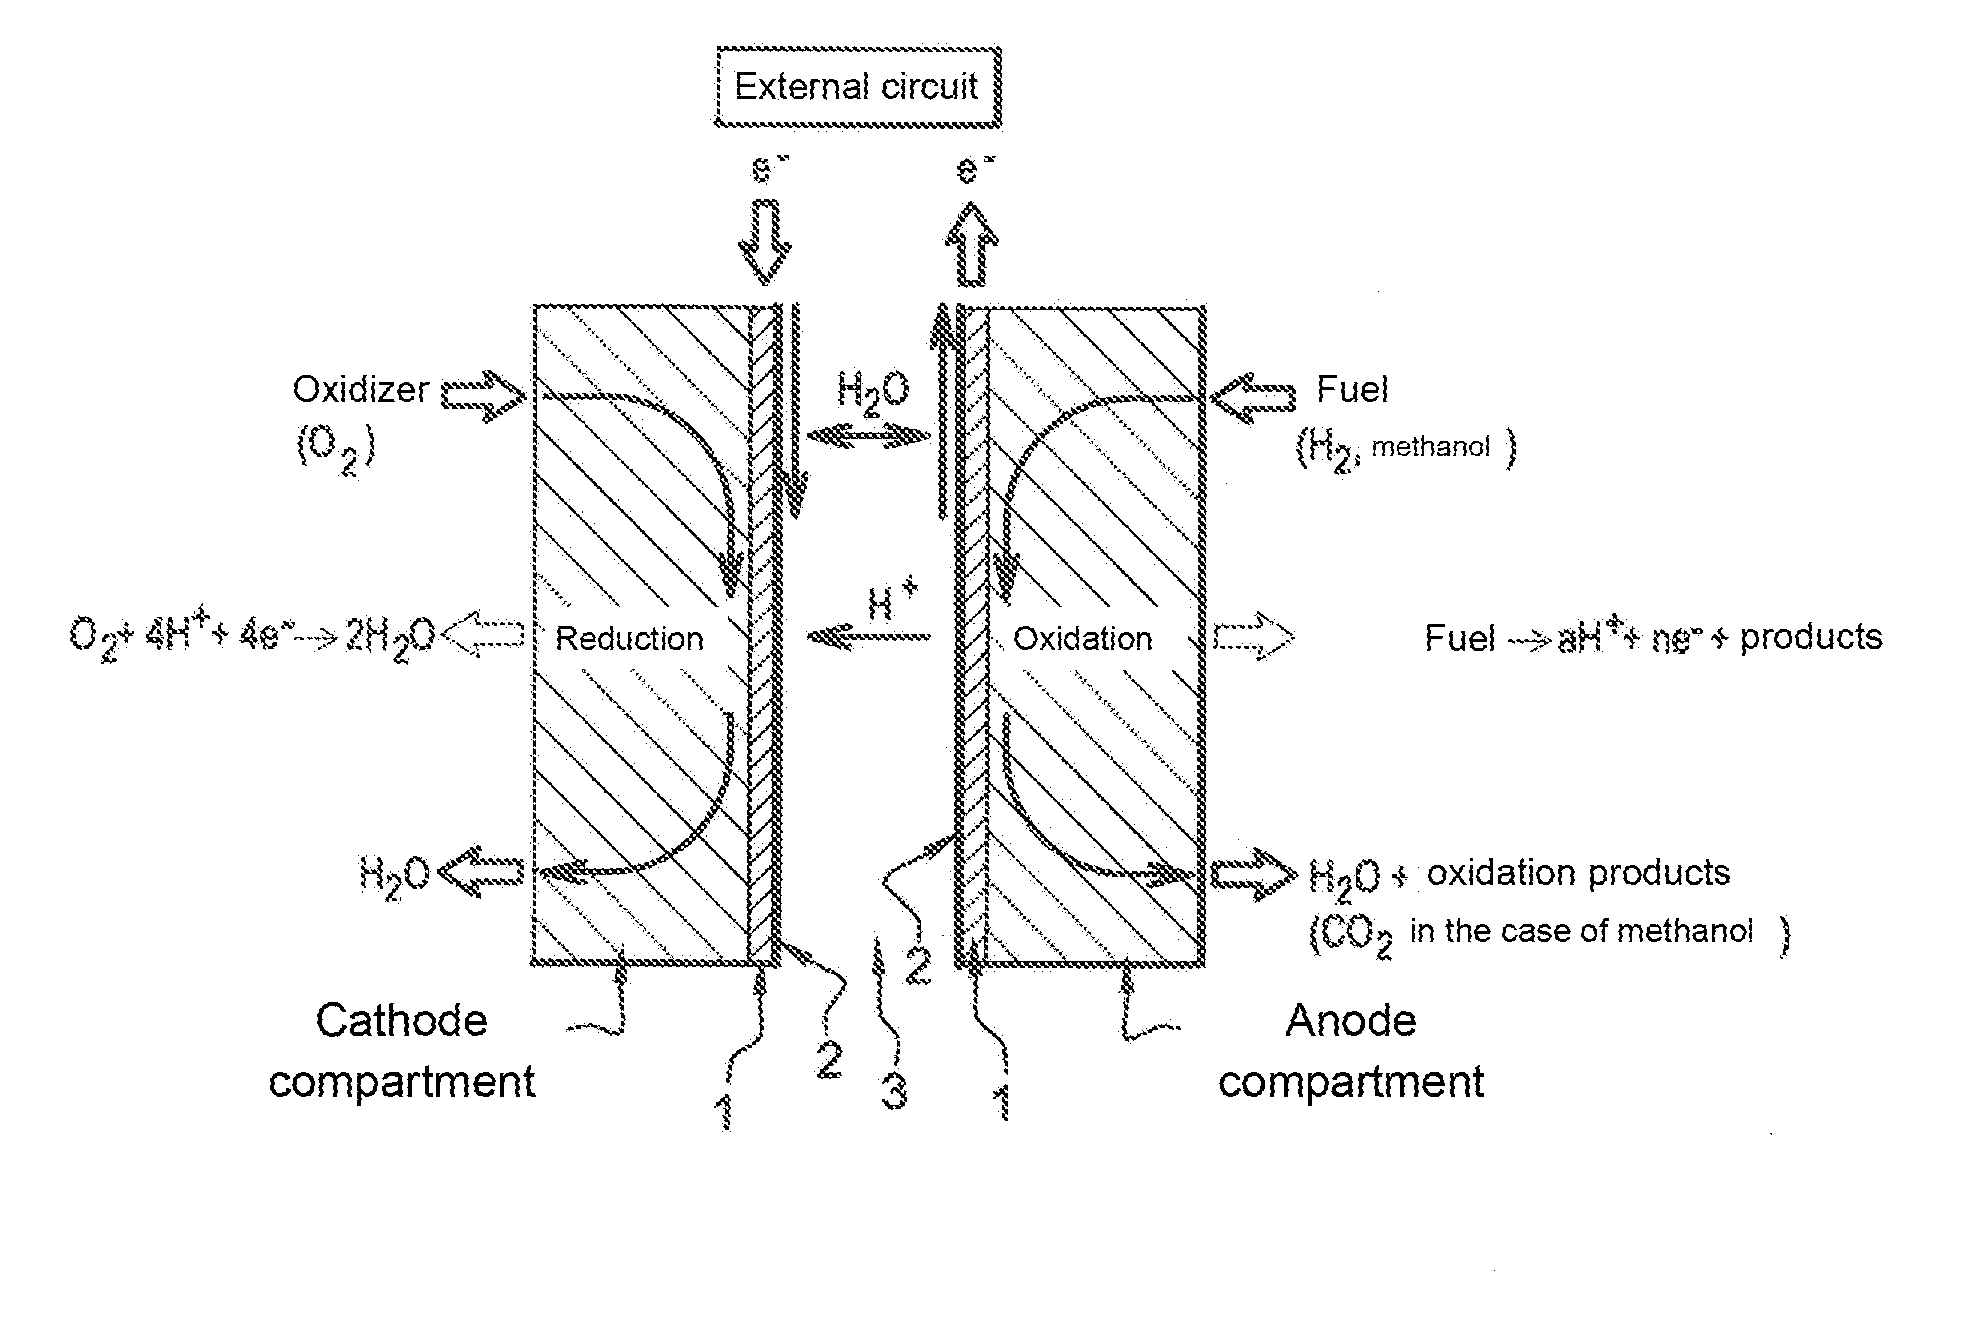 Membrane-electrodes assembly for proton exchange fuel cells (PEMFC), and manufacturing method